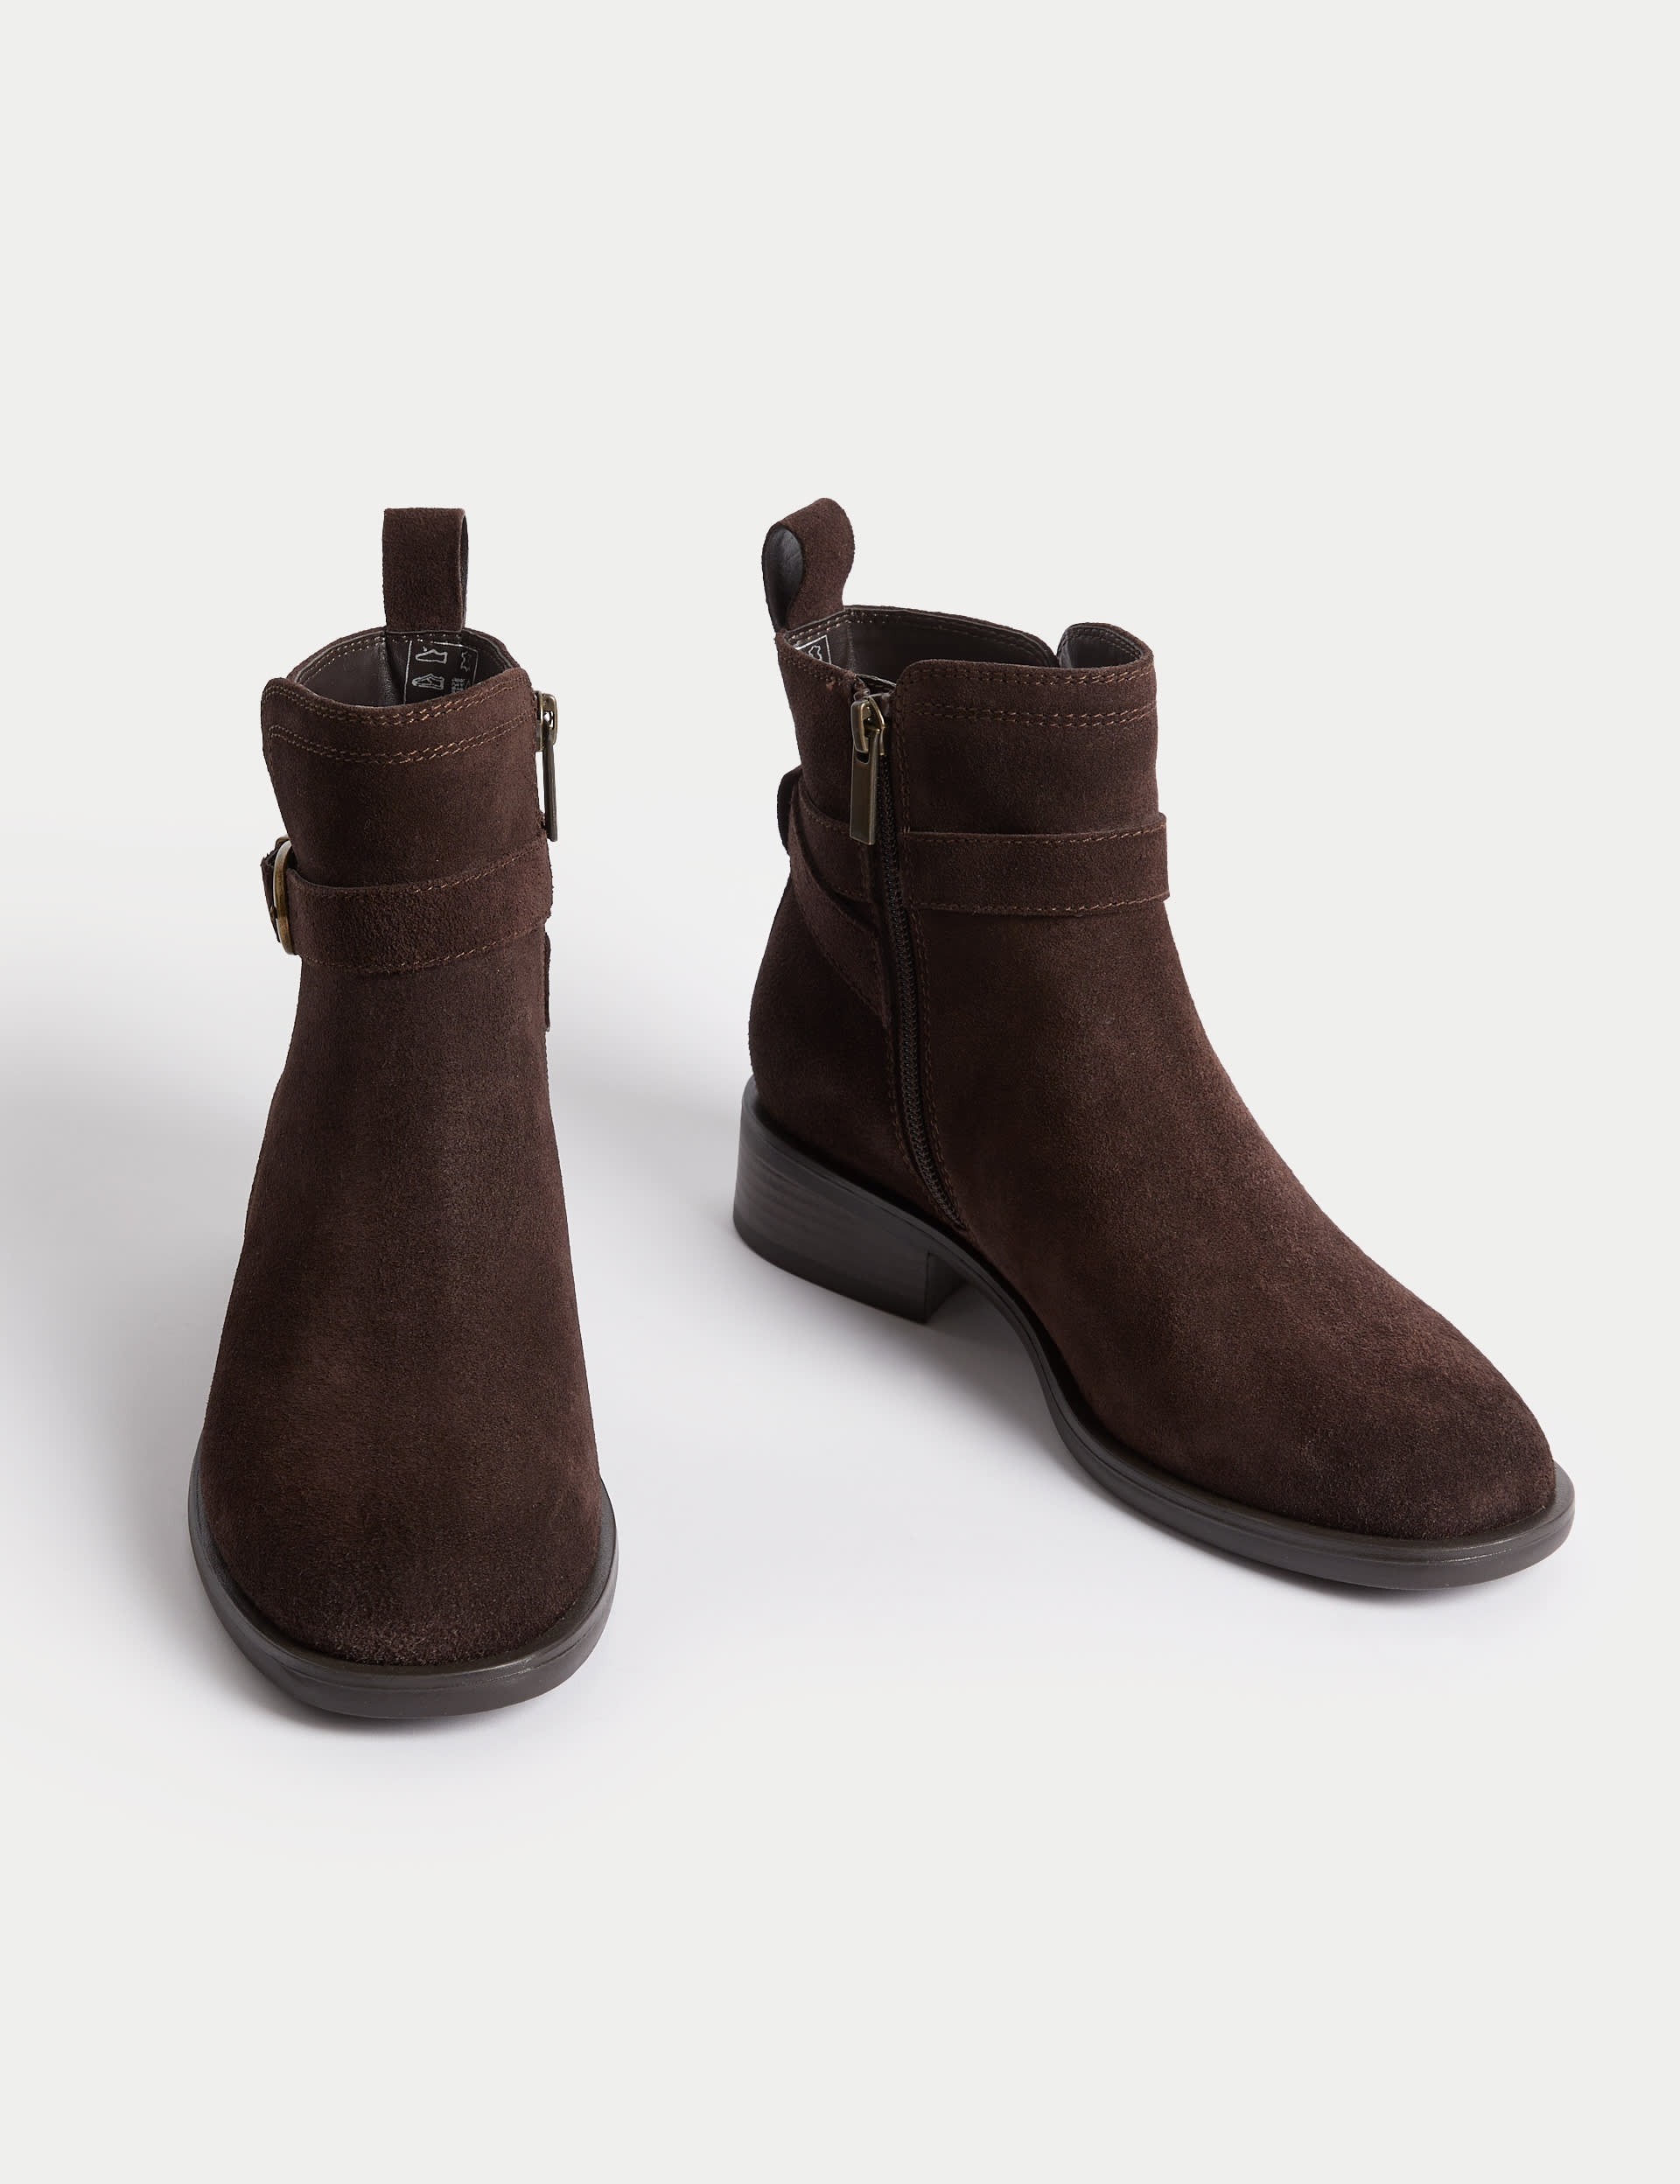 Suede Buckle Ankle Boots